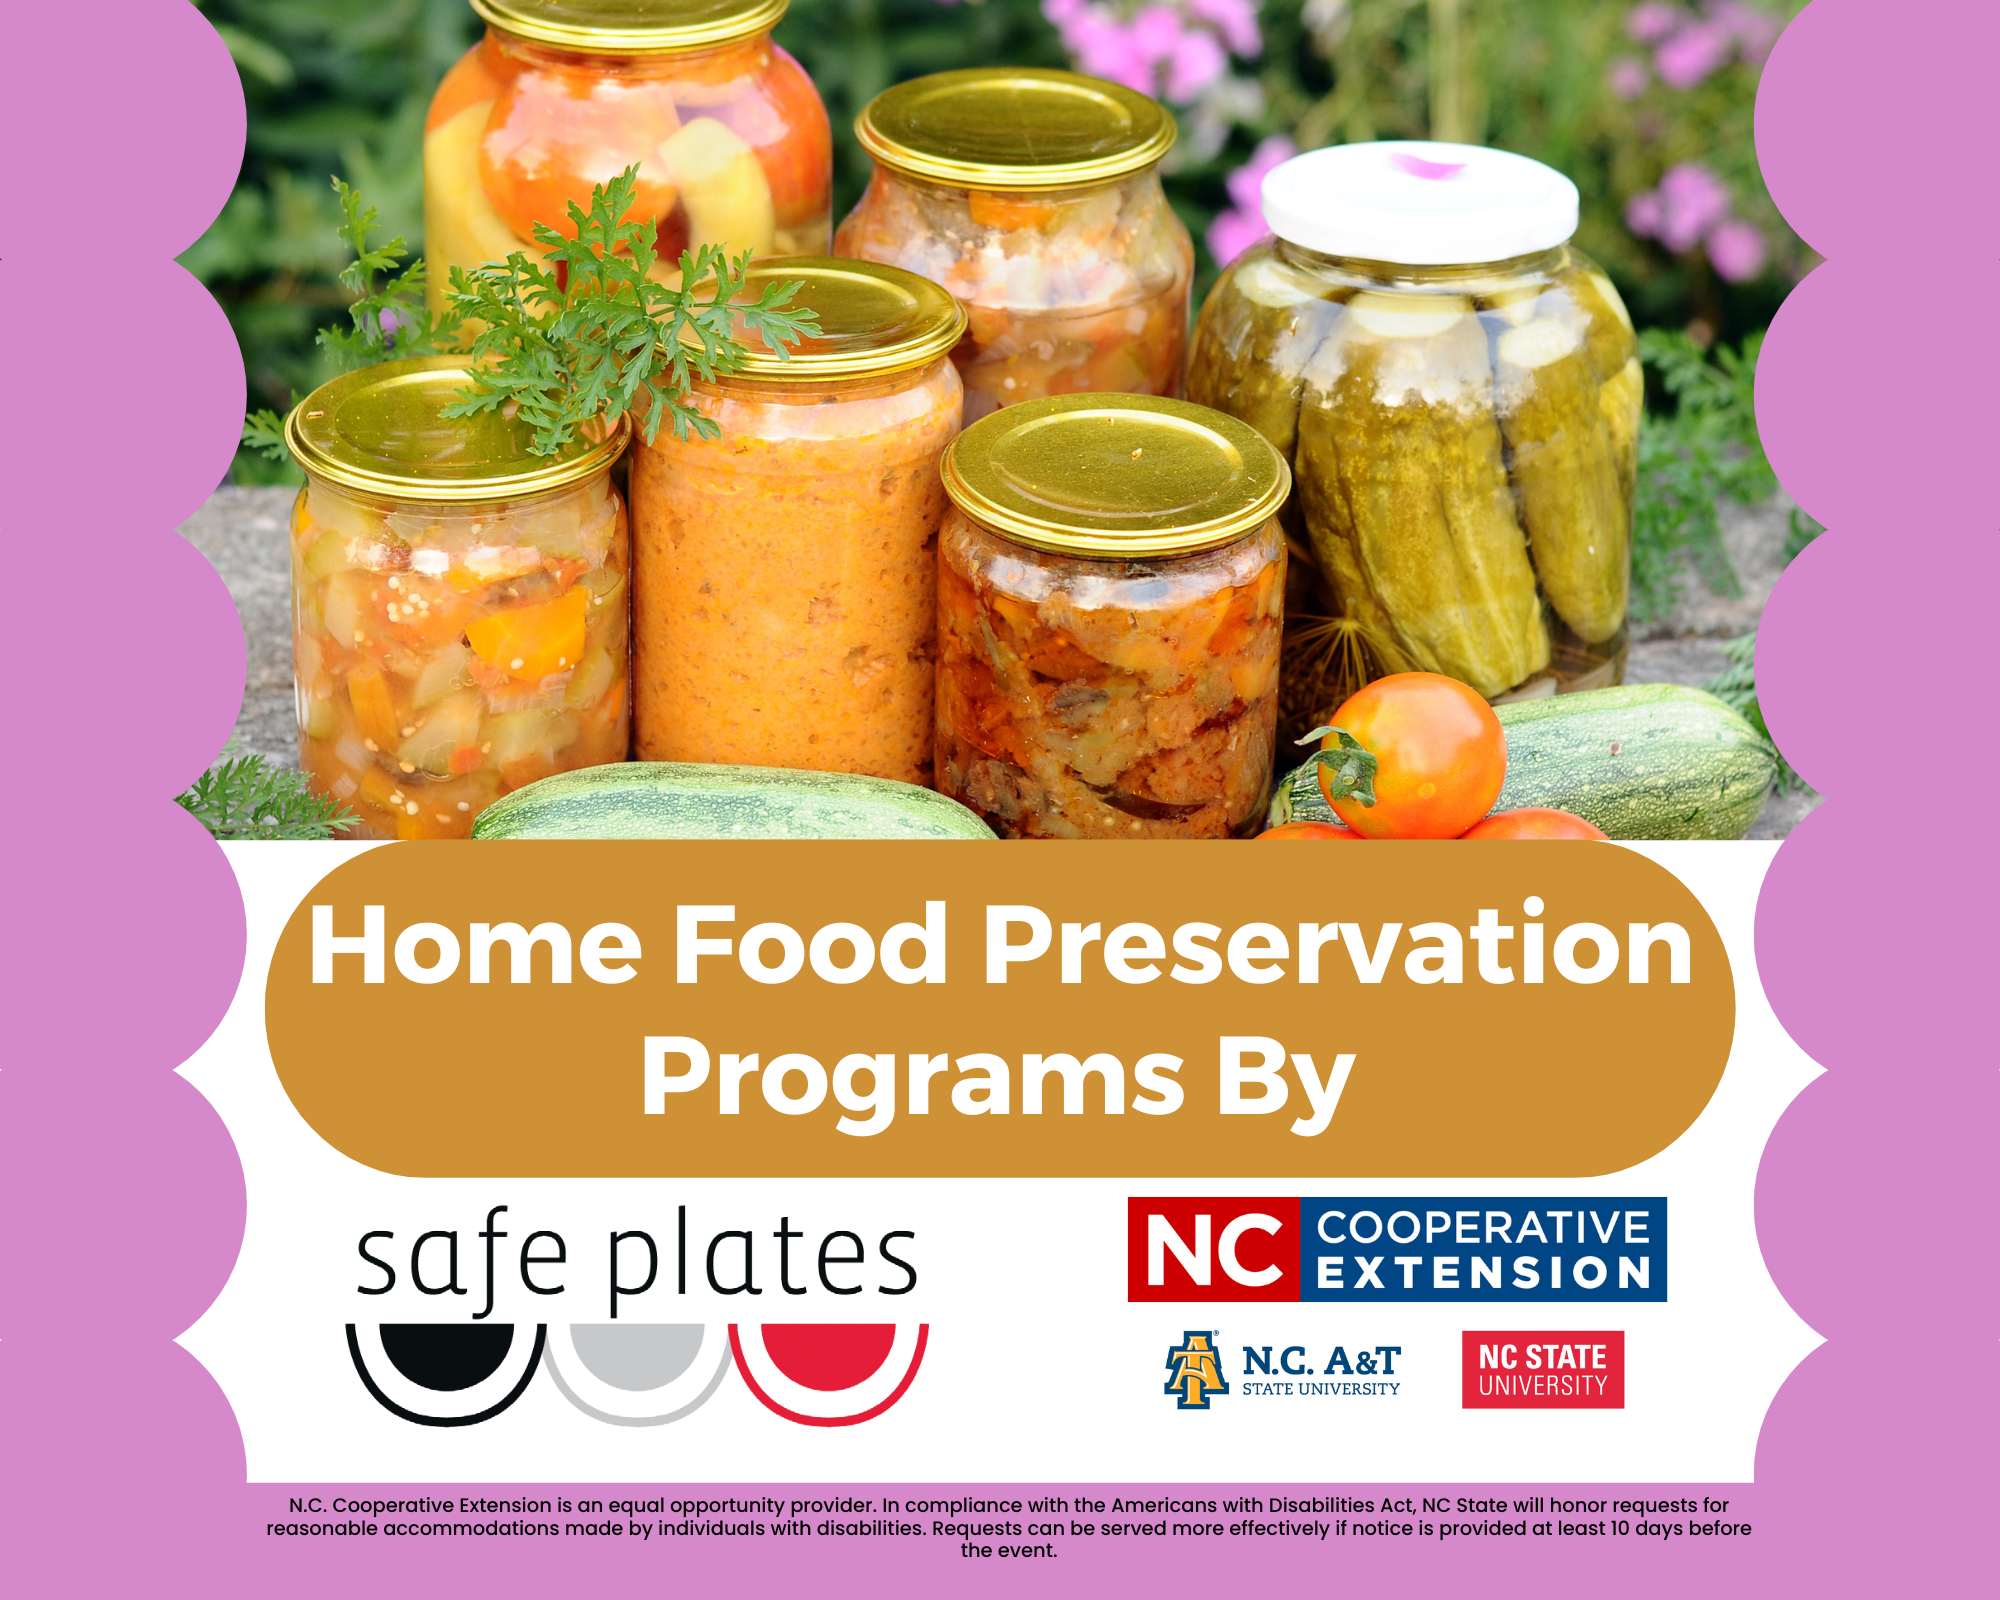 Wise Methods of Canning Vegetables - Alabama Cooperative Extension System